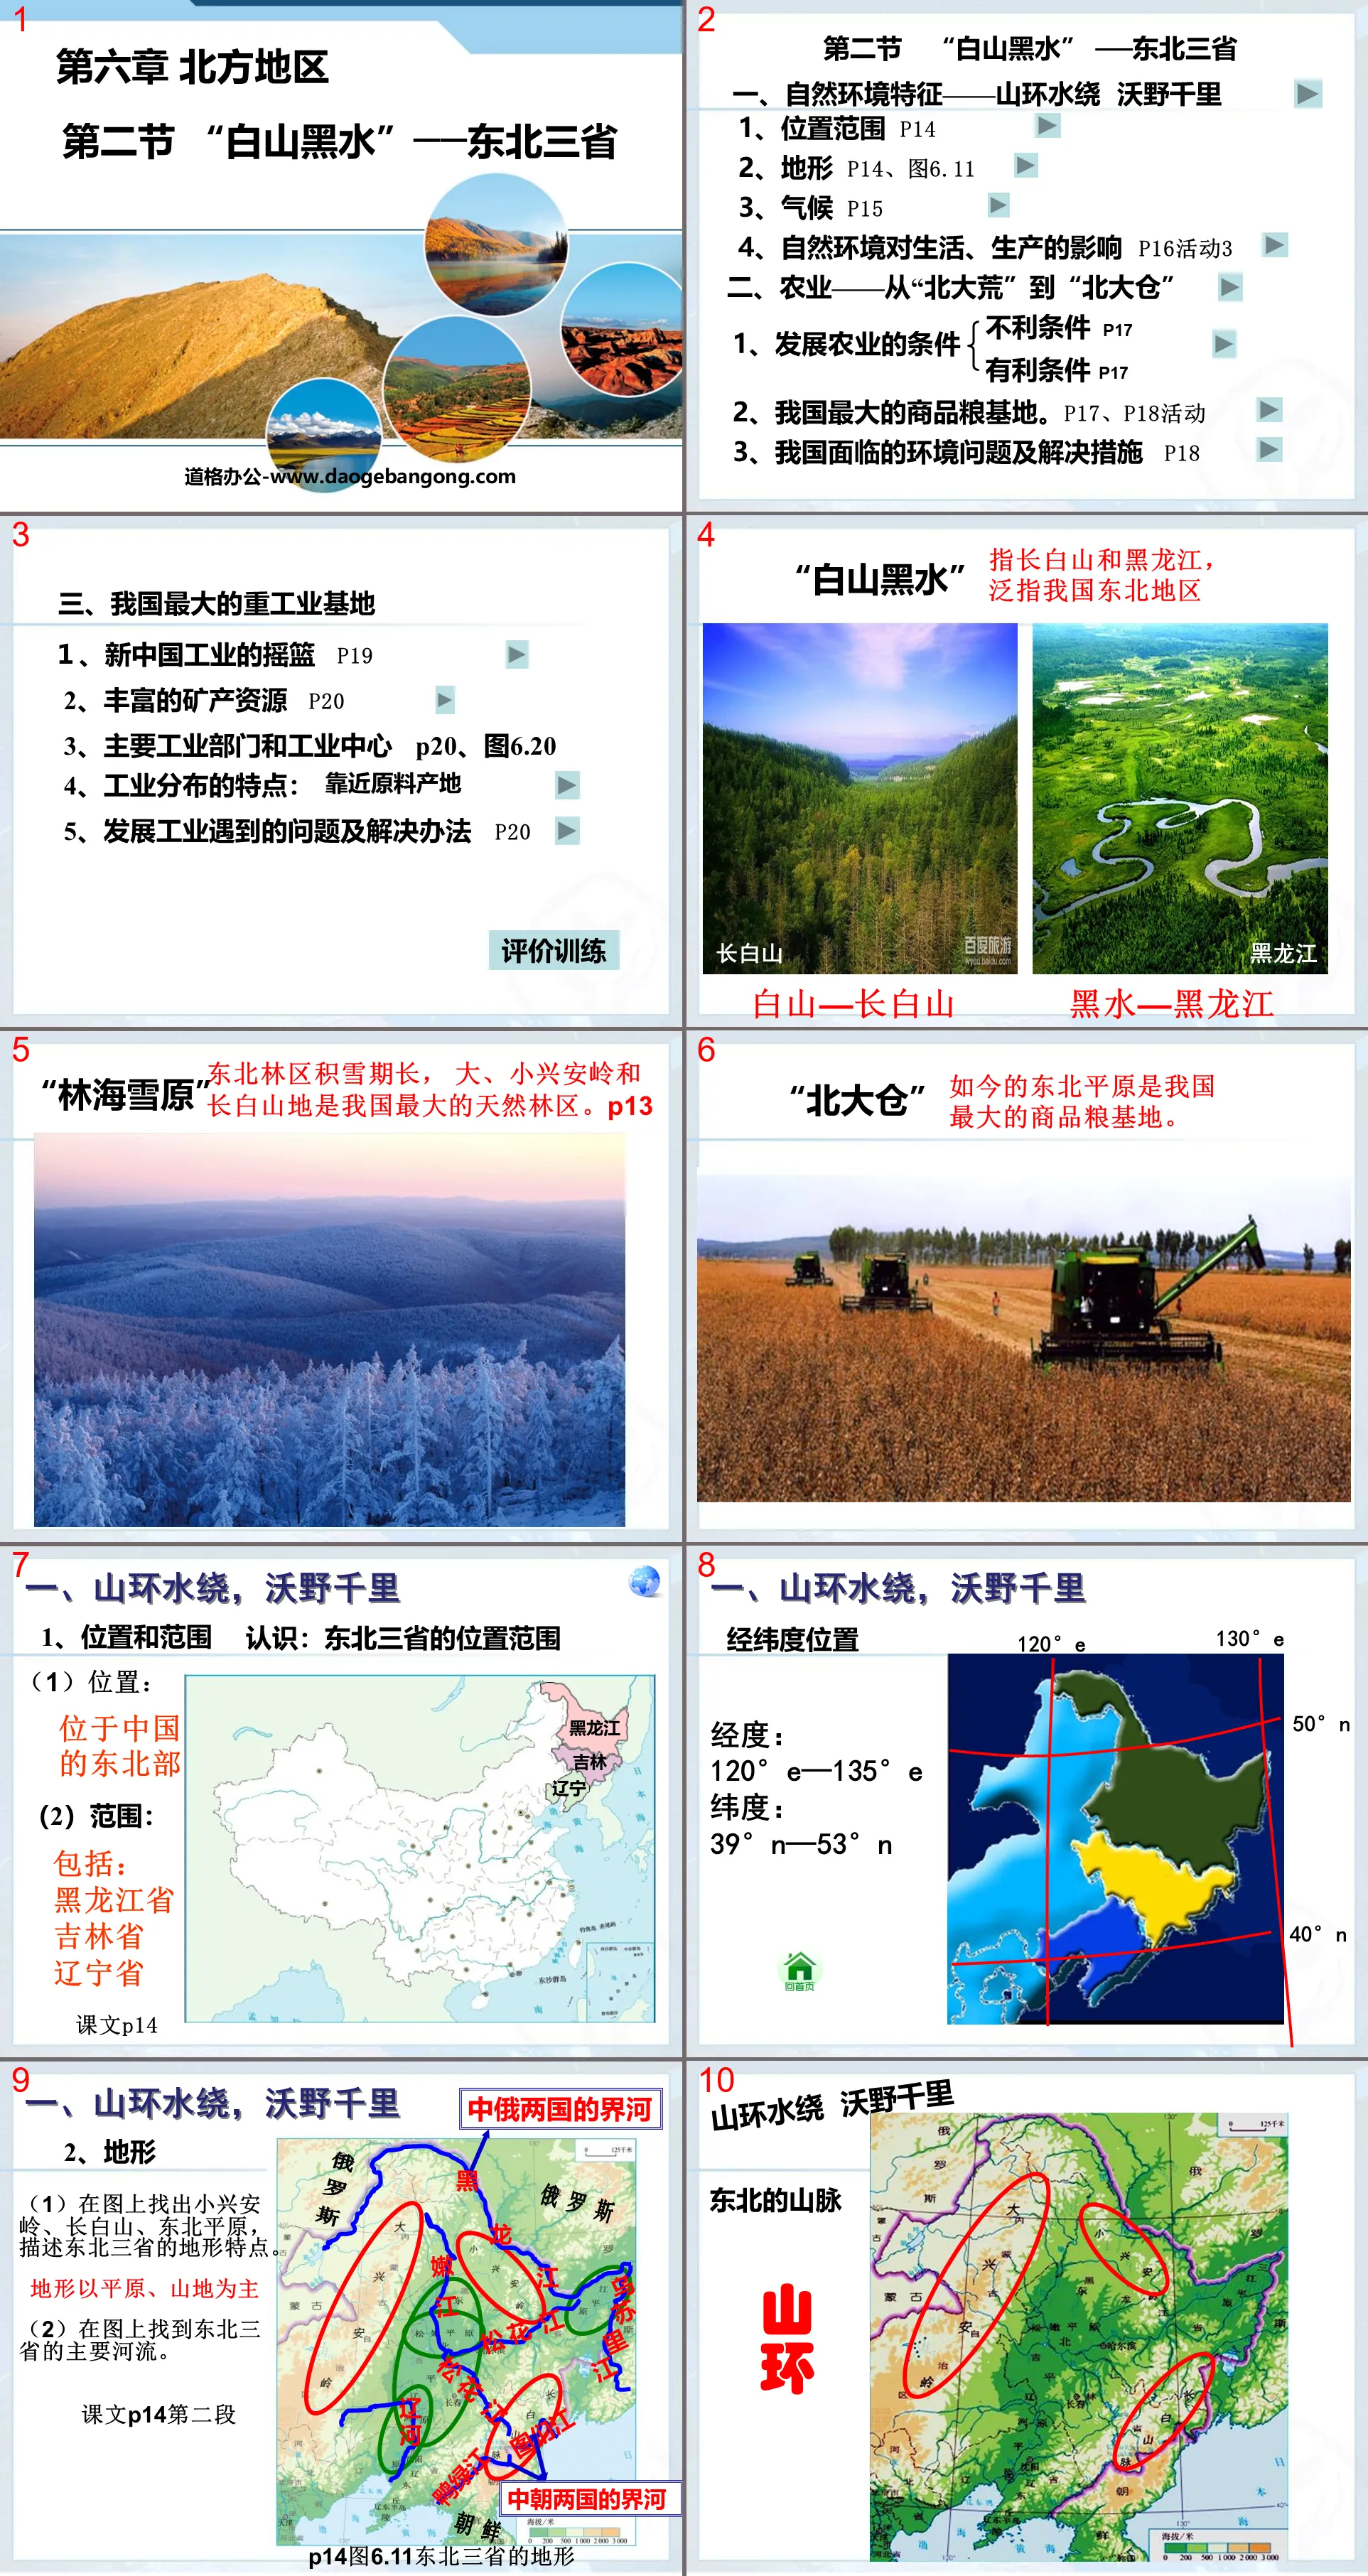 "The three northeastern provinces of Baishan and Heishui" PPT courseware for the northern region